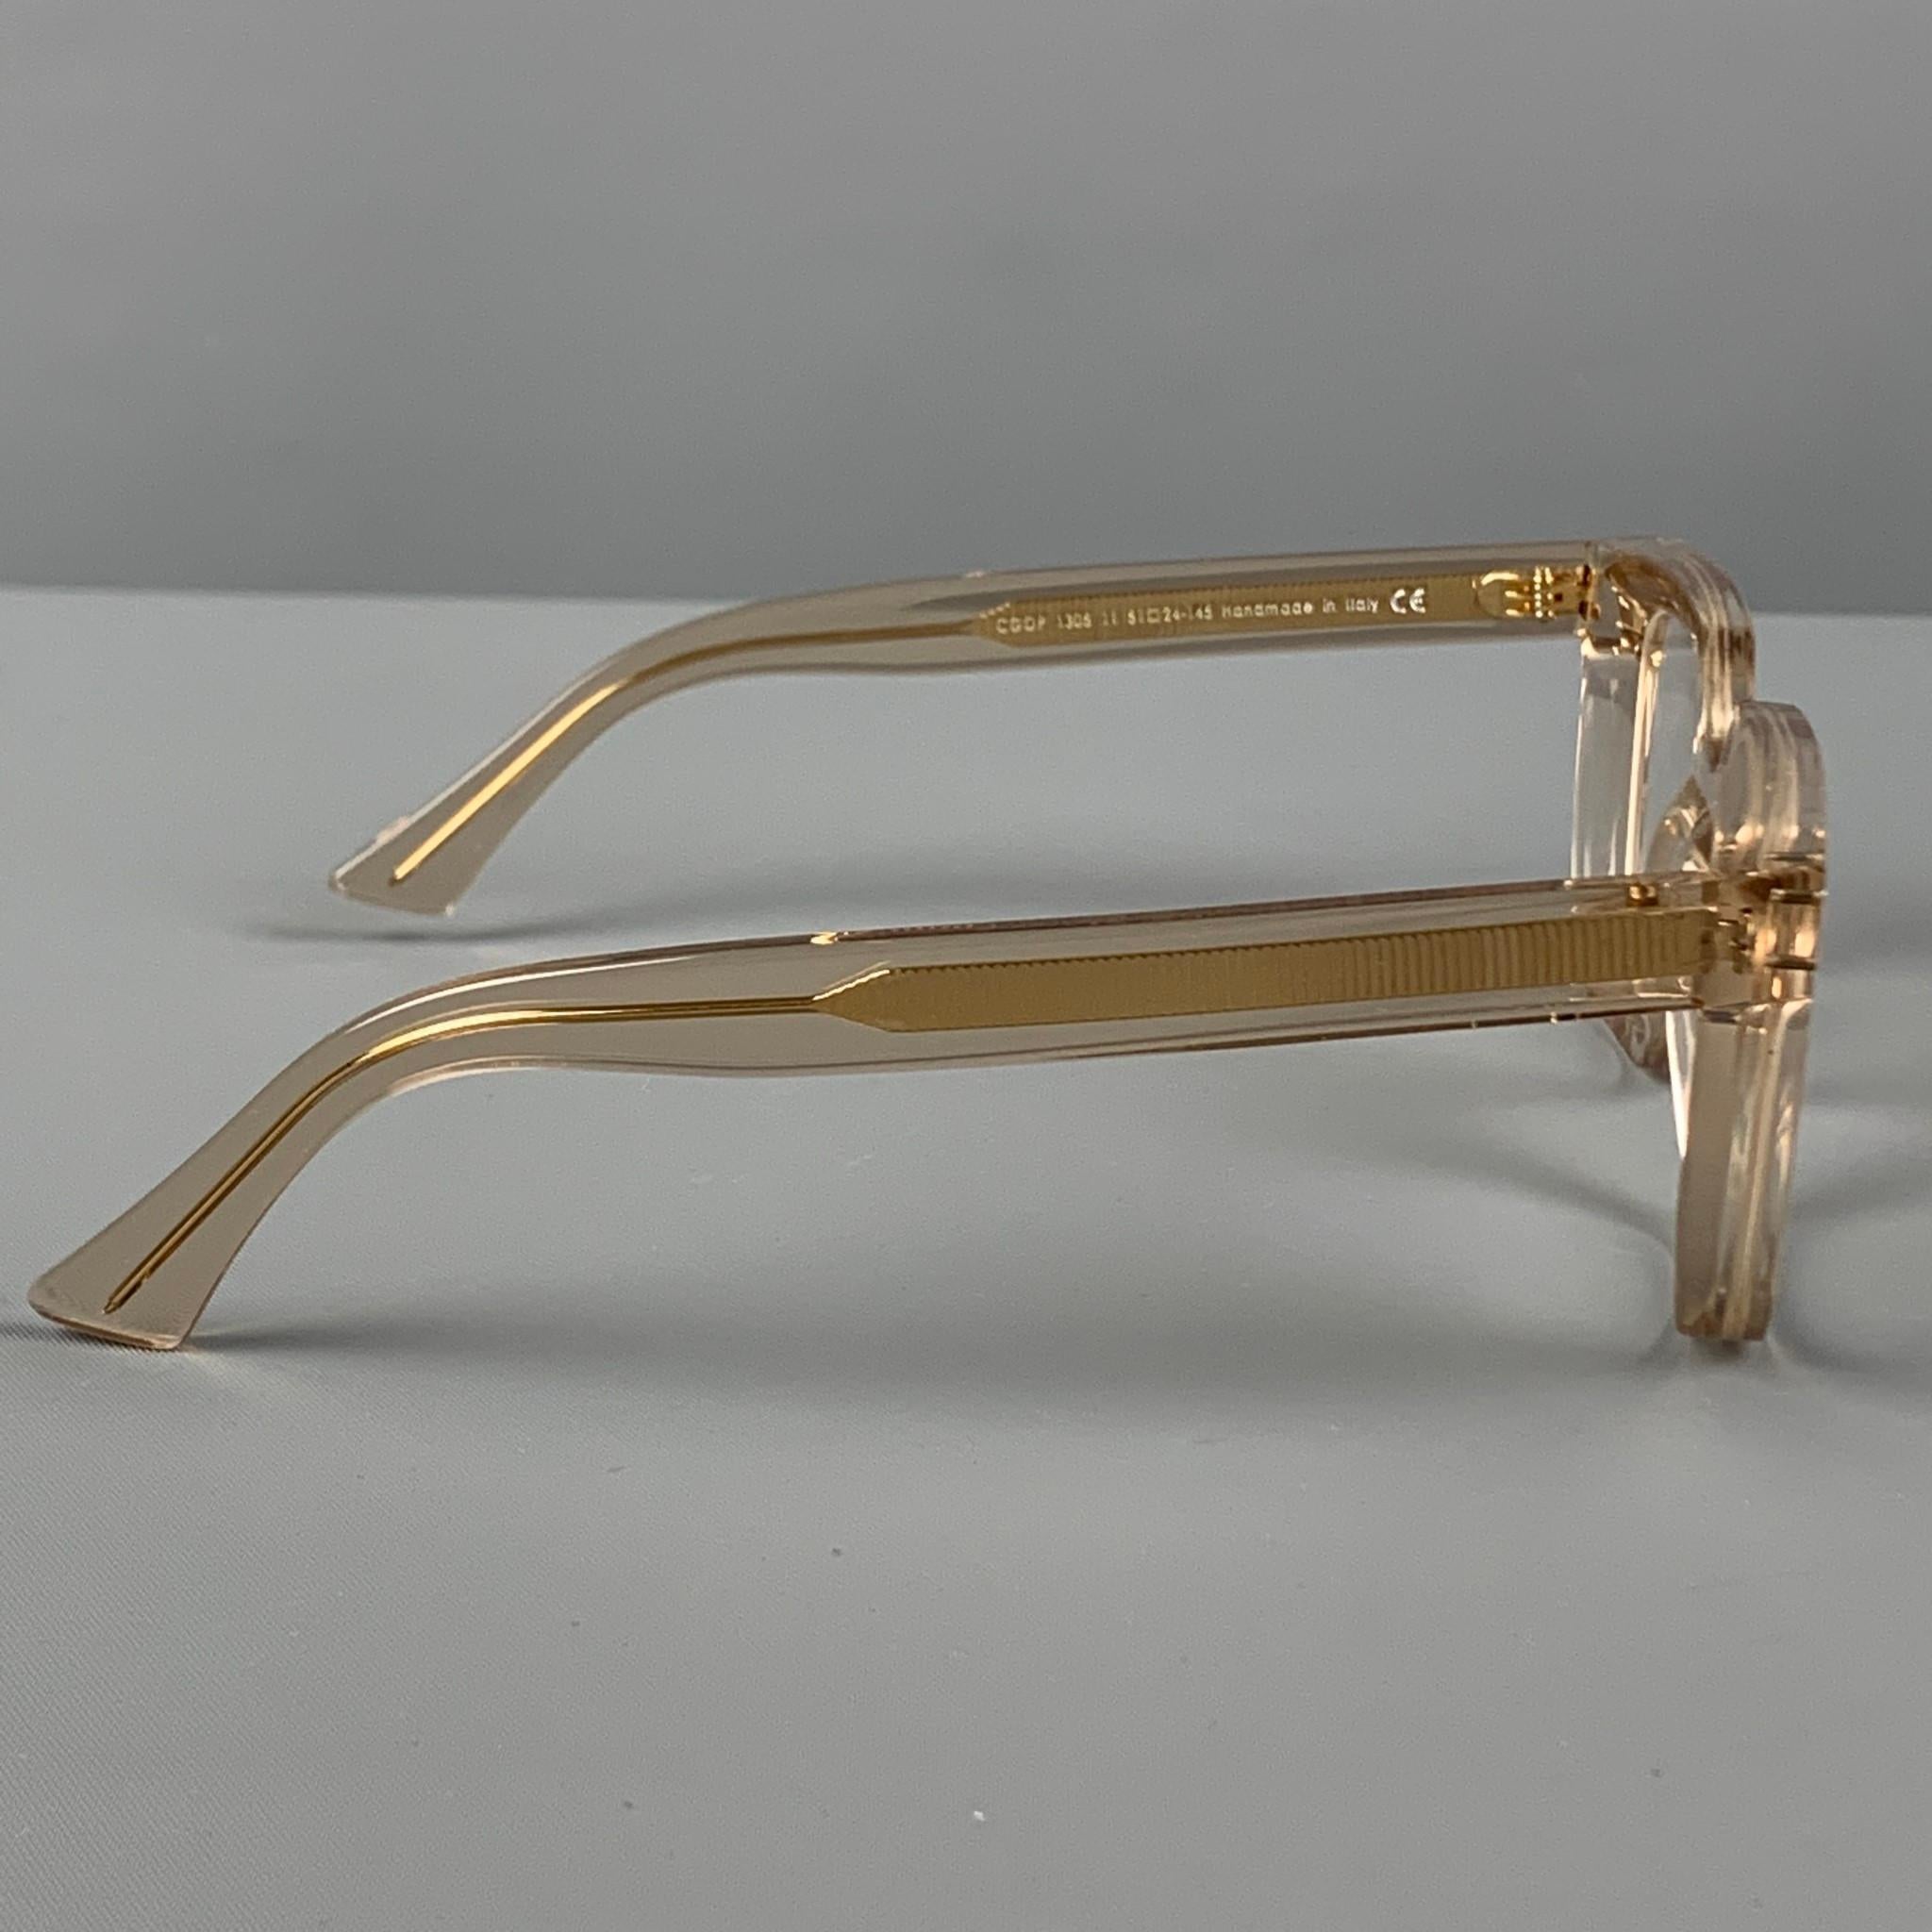 CUTLER AND GROSS sunglasses comes in a clear & gold tone acetate featuring clear lenses. Includes box. Handmade in Italy. 

Excellent Pre-Owned Condition.
Marked: CG0P 1305 11 51-25-145
Original Retail Price: $495.00

Measurements:

Length: 15